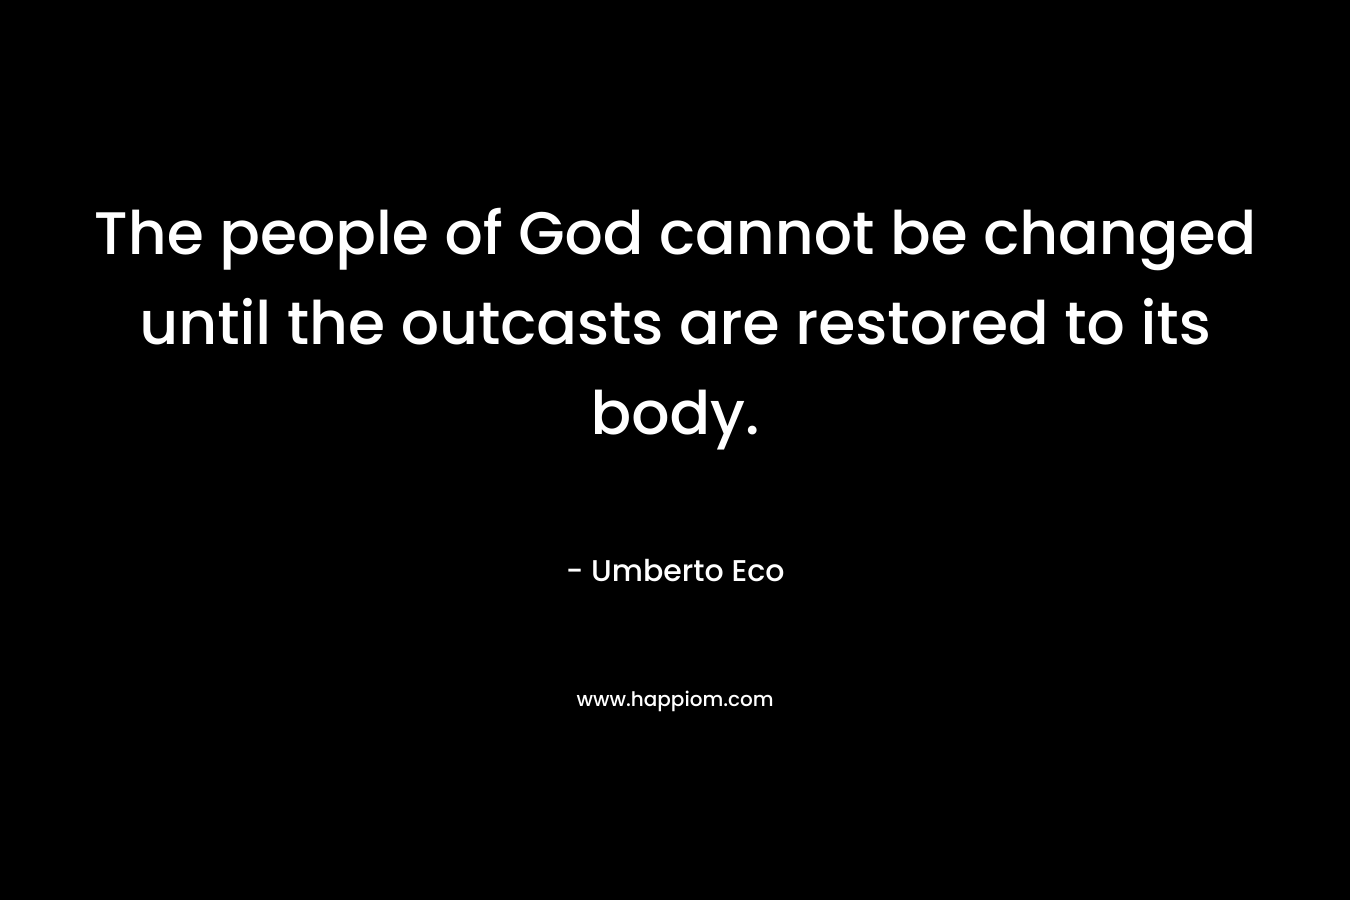 The people of God cannot be changed until the outcasts are restored to its body.